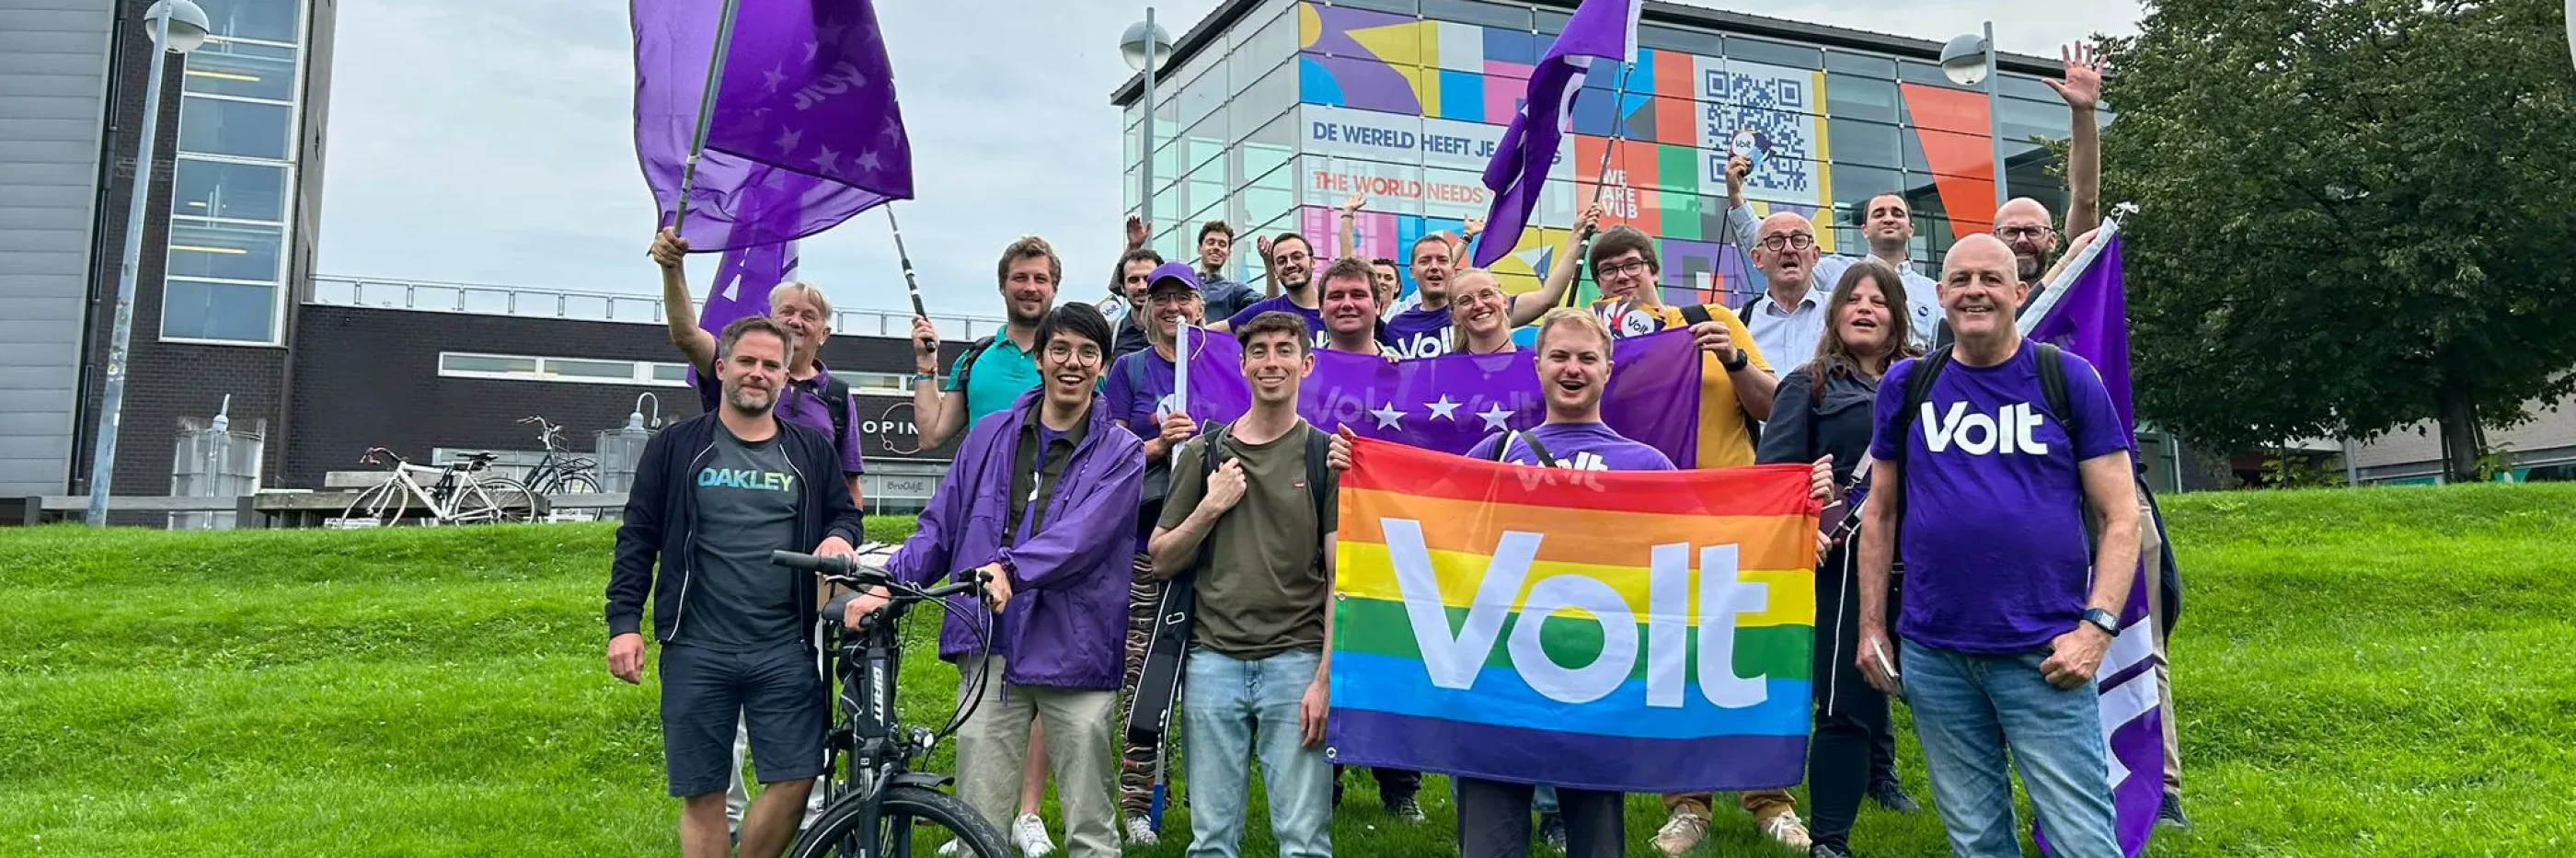 Group of Volters with flags and bikes in Brussels VUB